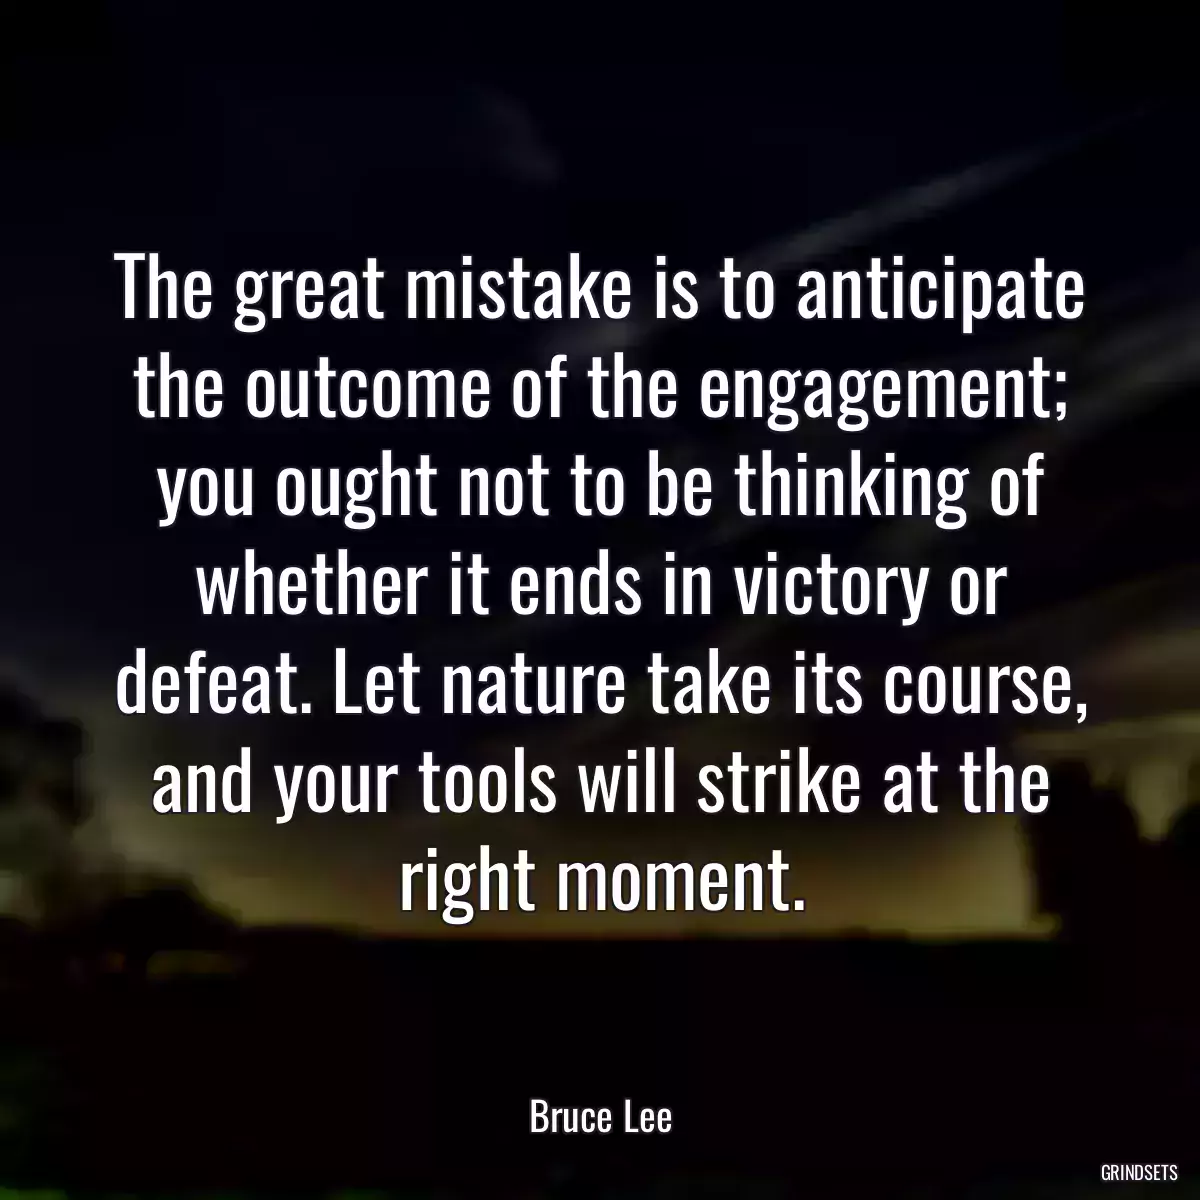 The great mistake is to anticipate the outcome of the engagement; you ought not to be thinking of whether it ends in victory or defeat. Let nature take its course, and your tools will strike at the right moment.